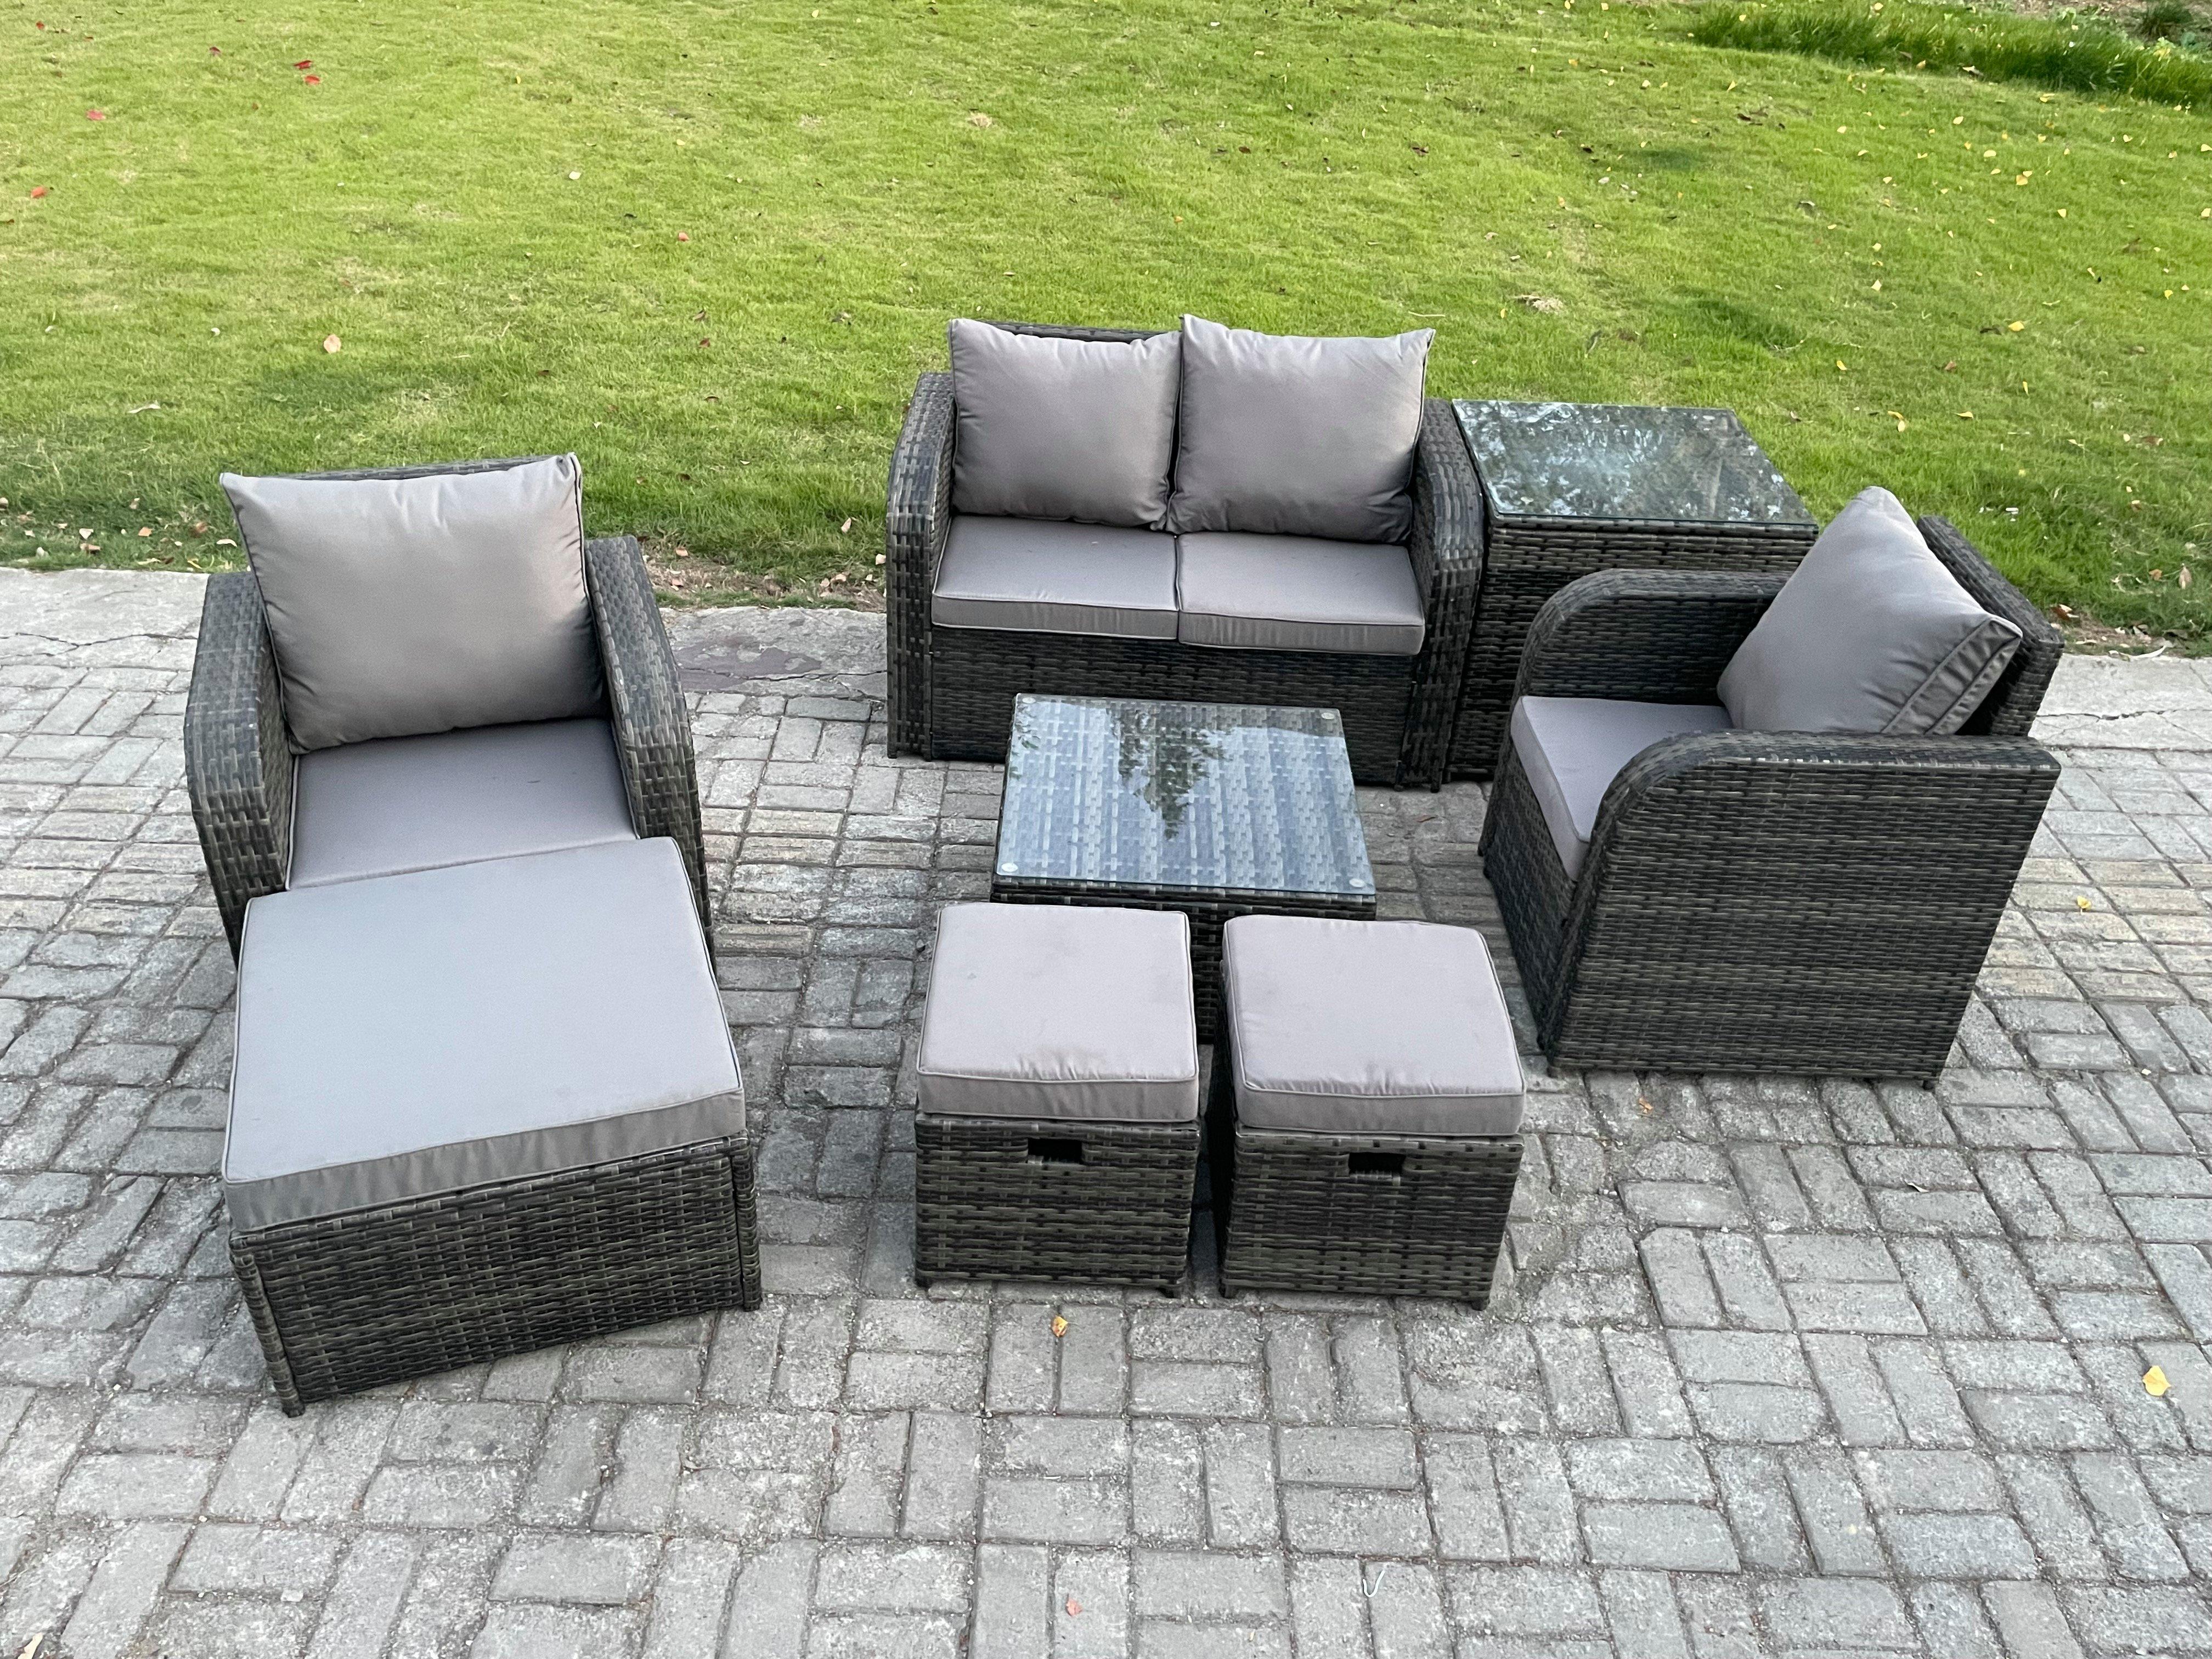 Rattan Garden Furniture Set Patio Conservatory Indoor Outdoor 8 Piece Set With Love Sofa Square Coffee Table